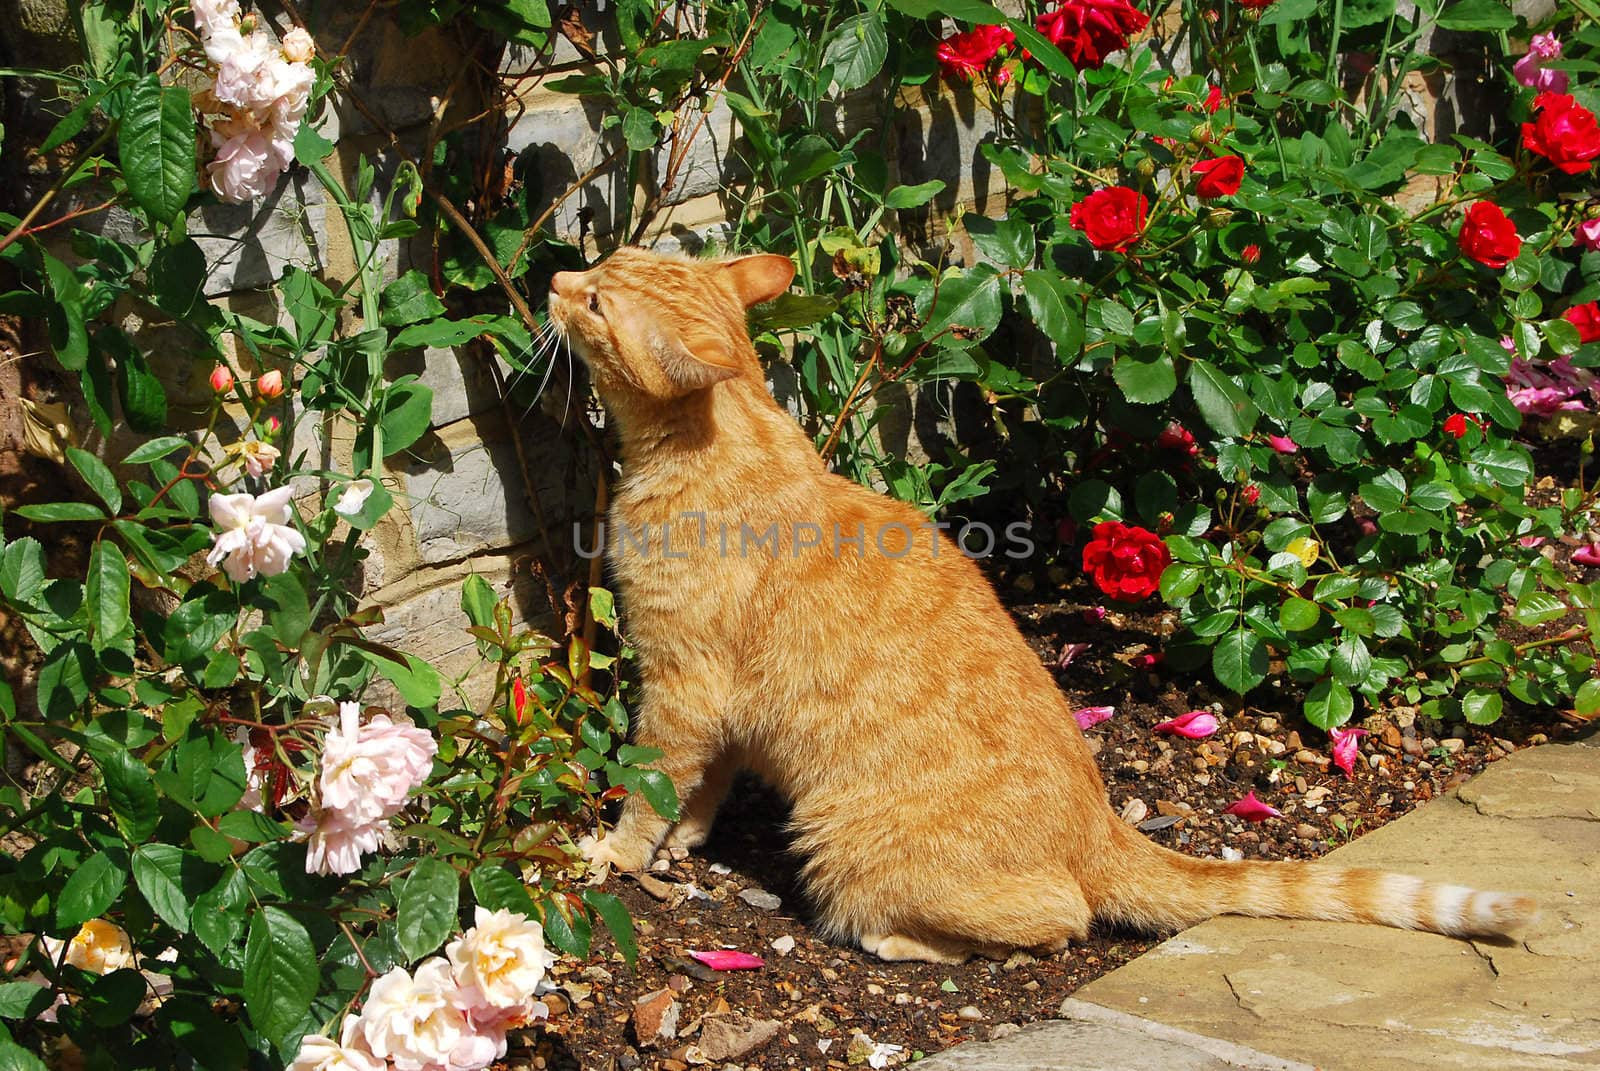 Red-haired cat and colourful flowers in garden